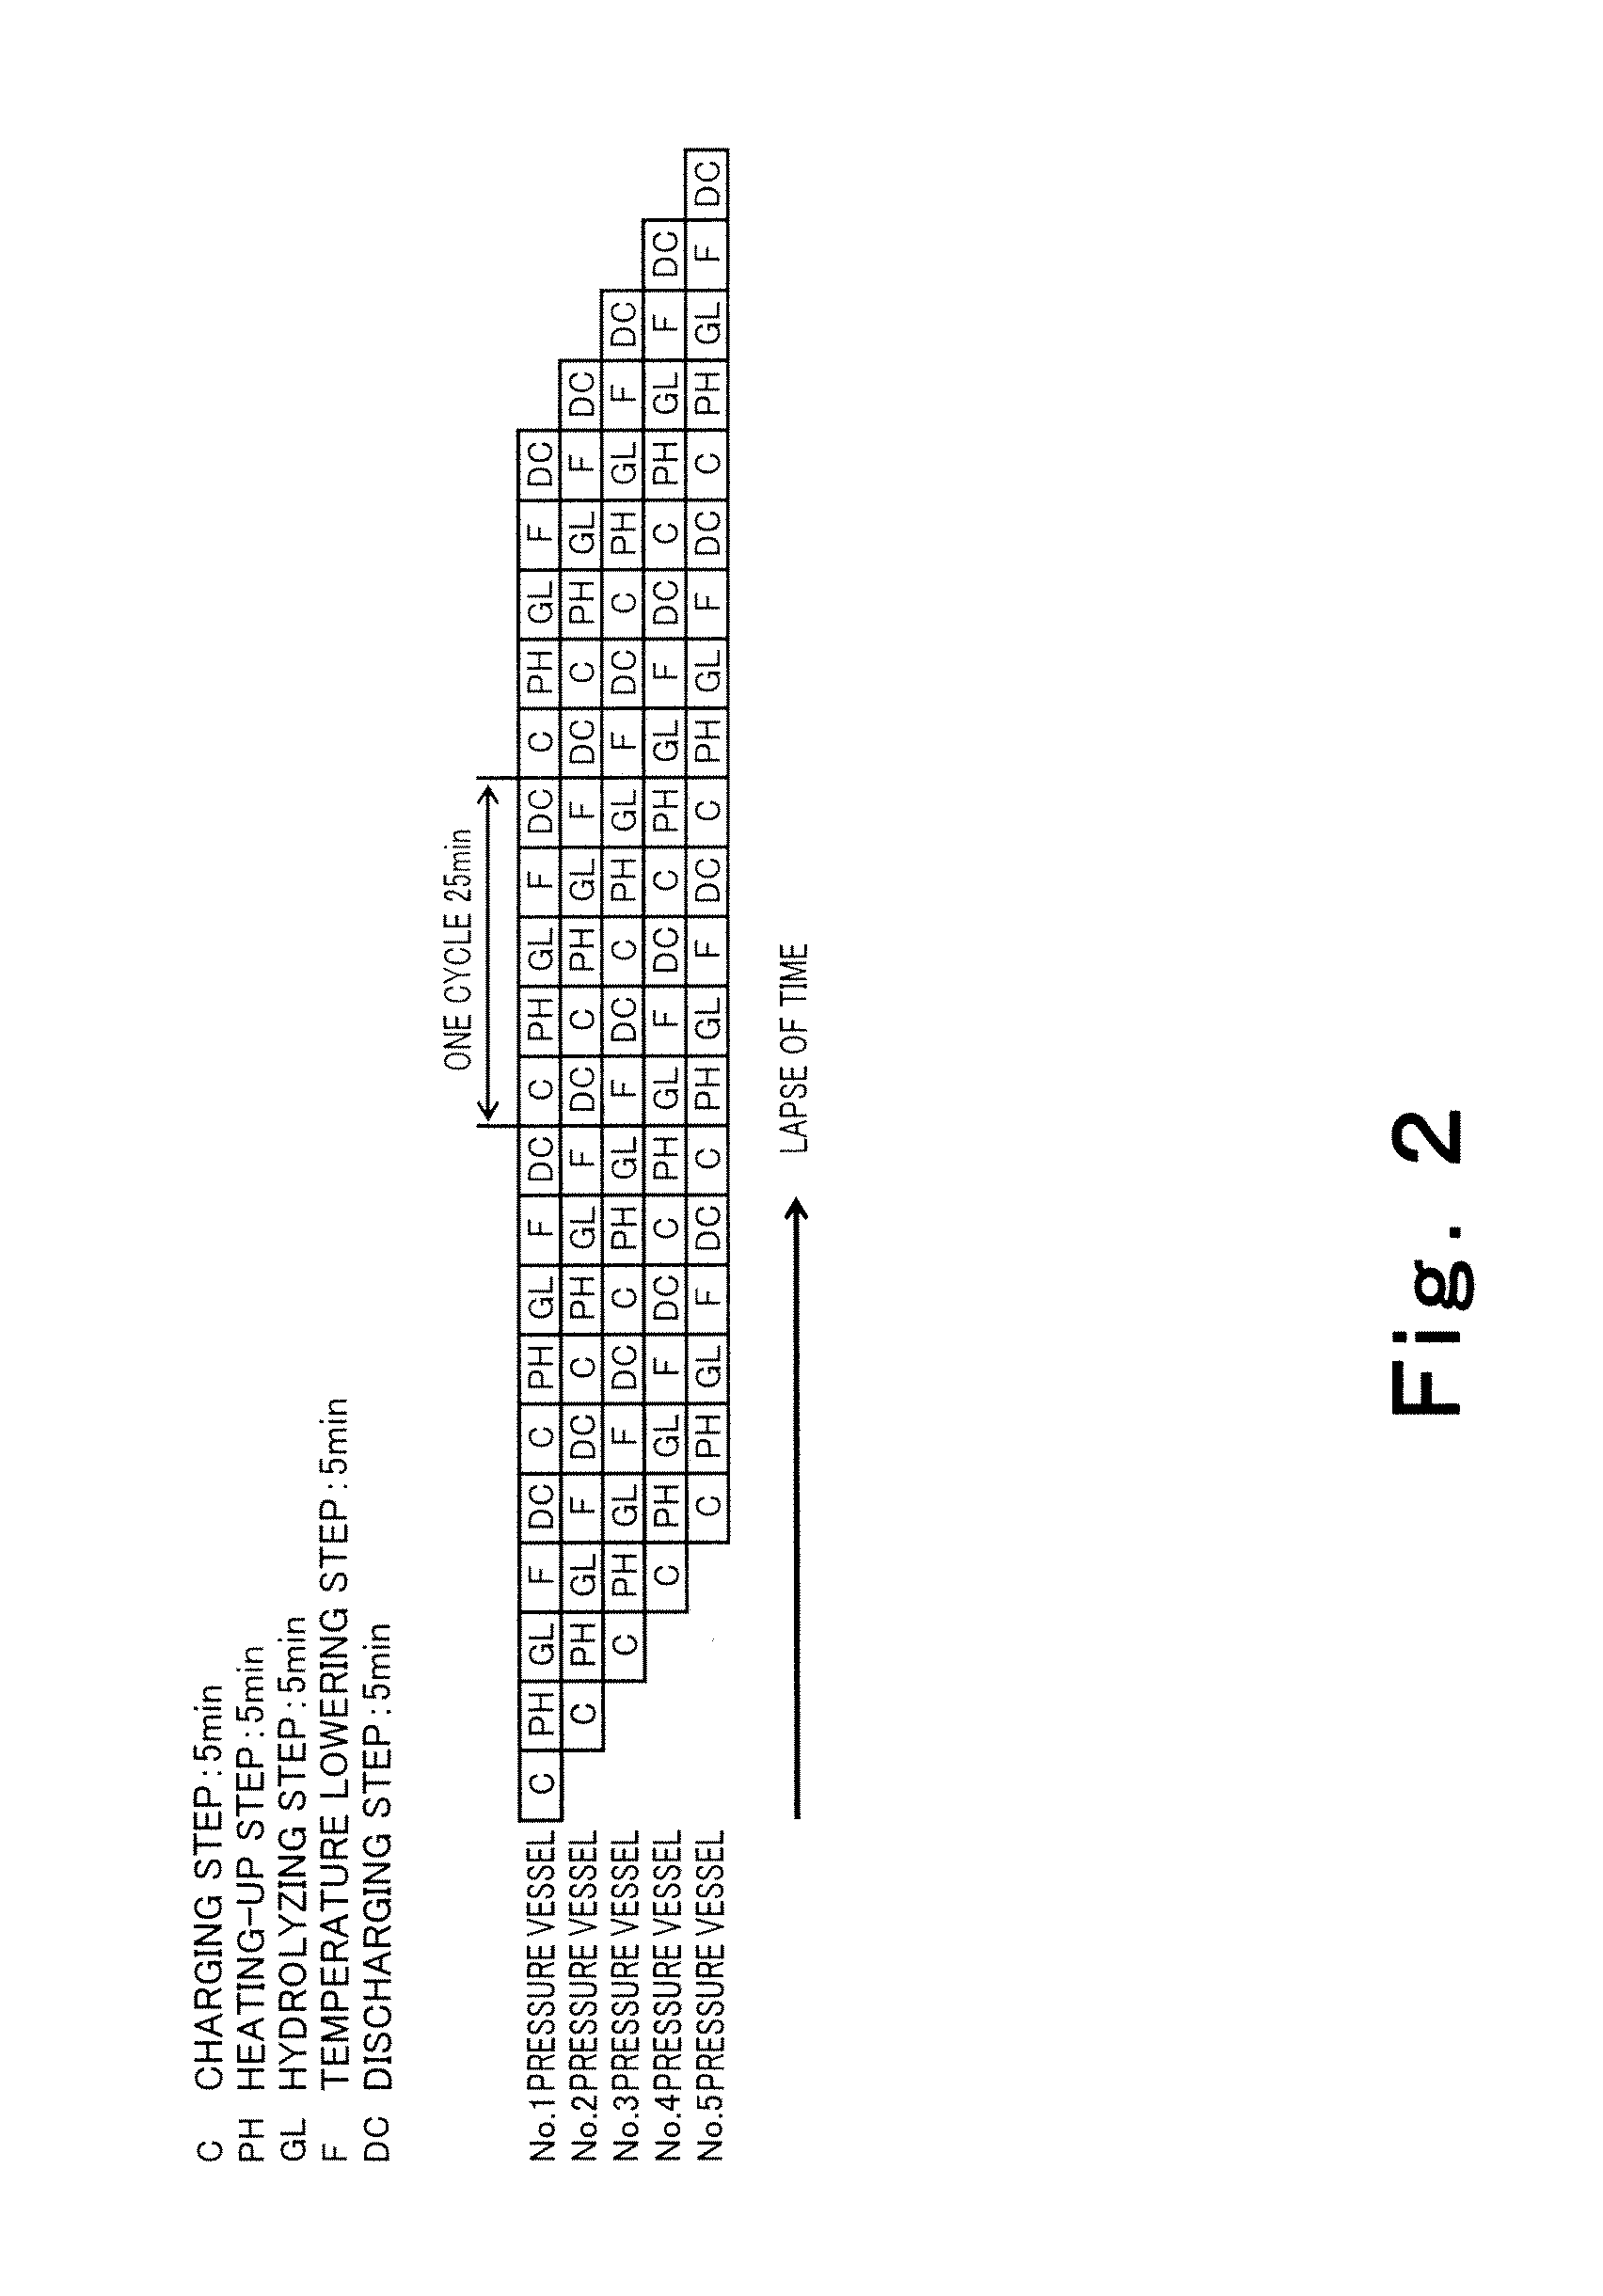 Method and System for Hydrolytic Saccharification of a Cellulosic Biomass